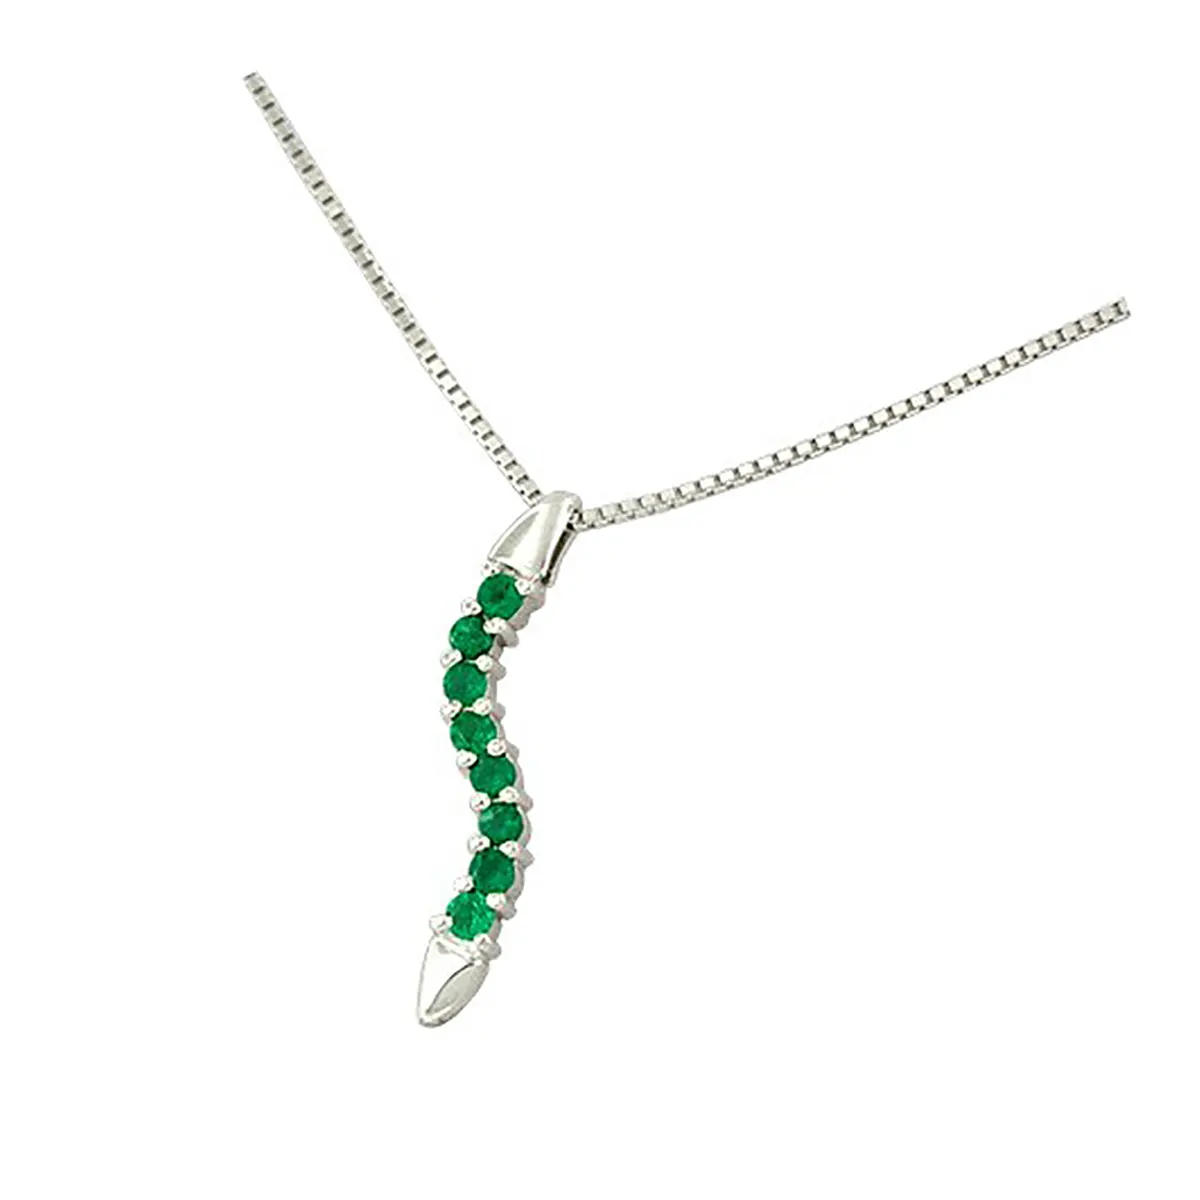 18K White Gold Emerald Necklace with 8 Round Emeralds